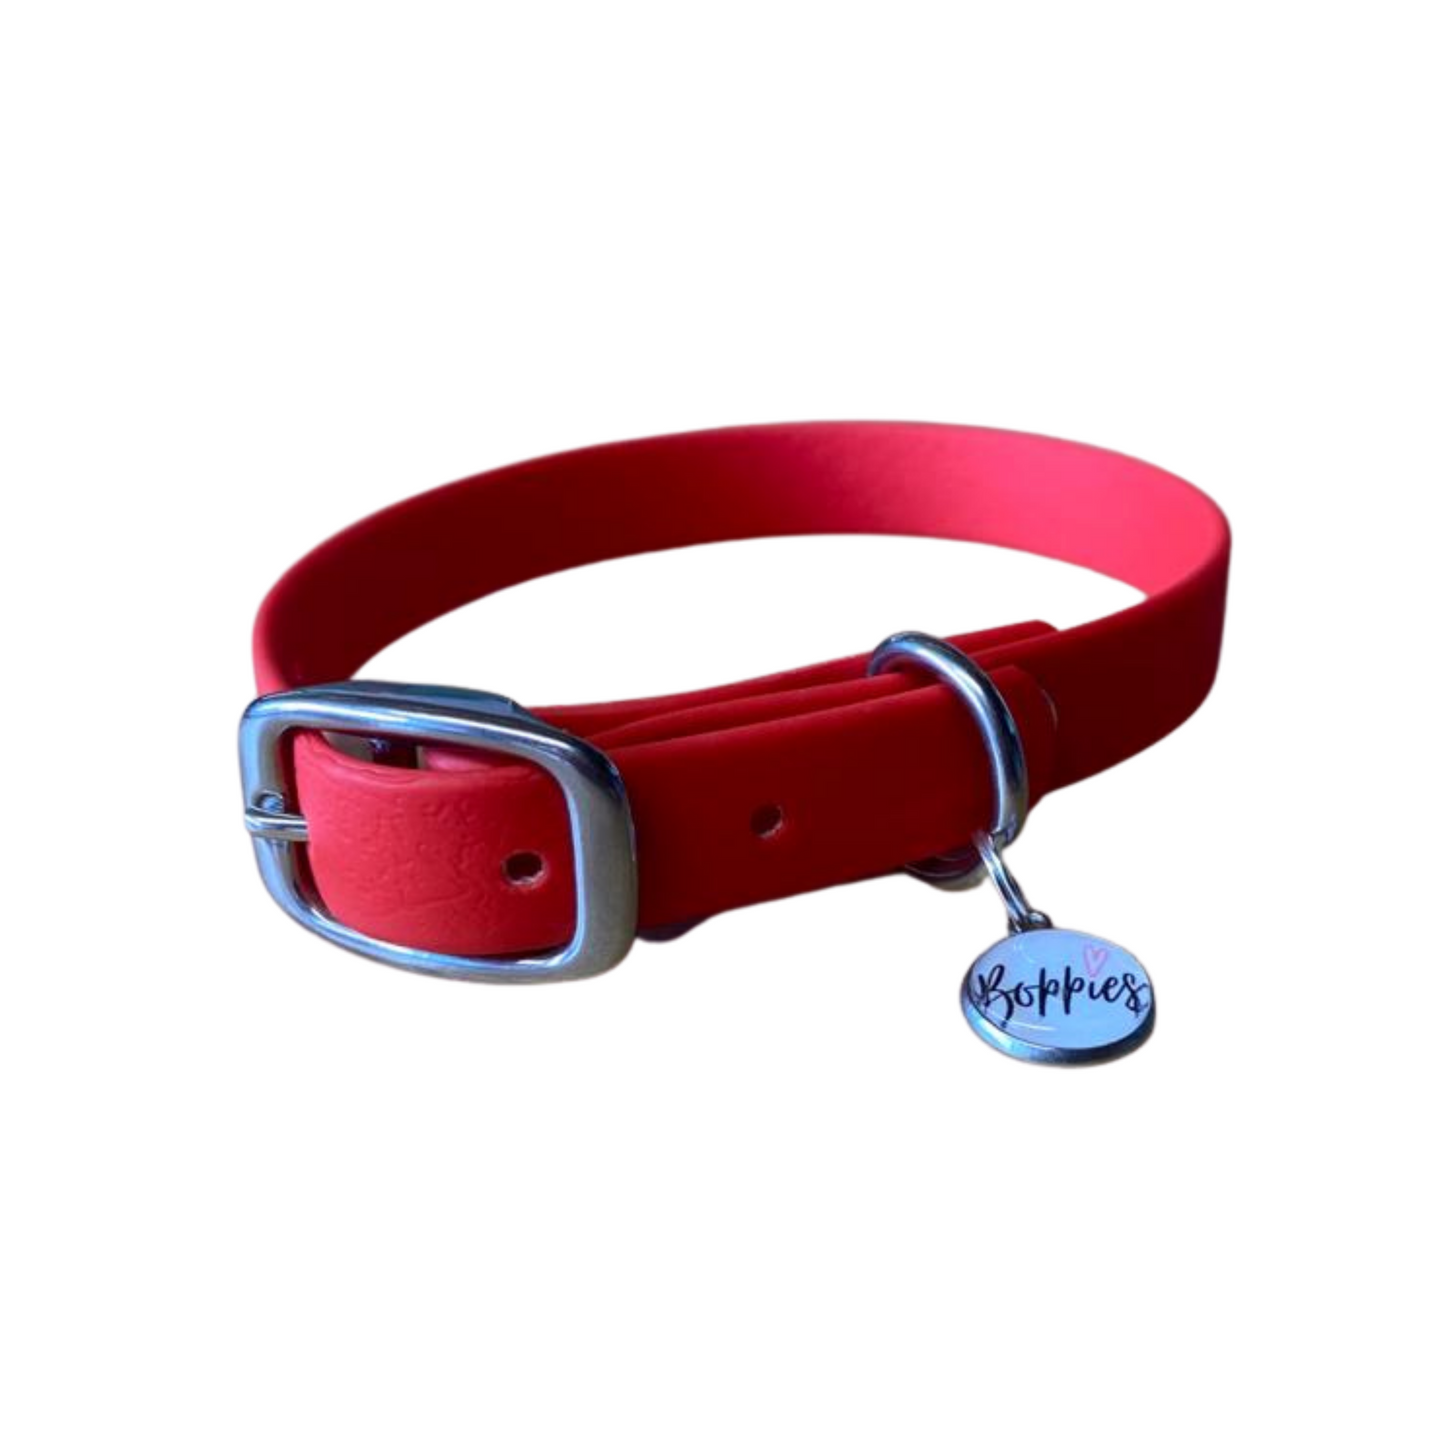 Red waterproof dog collar with silver hardware.